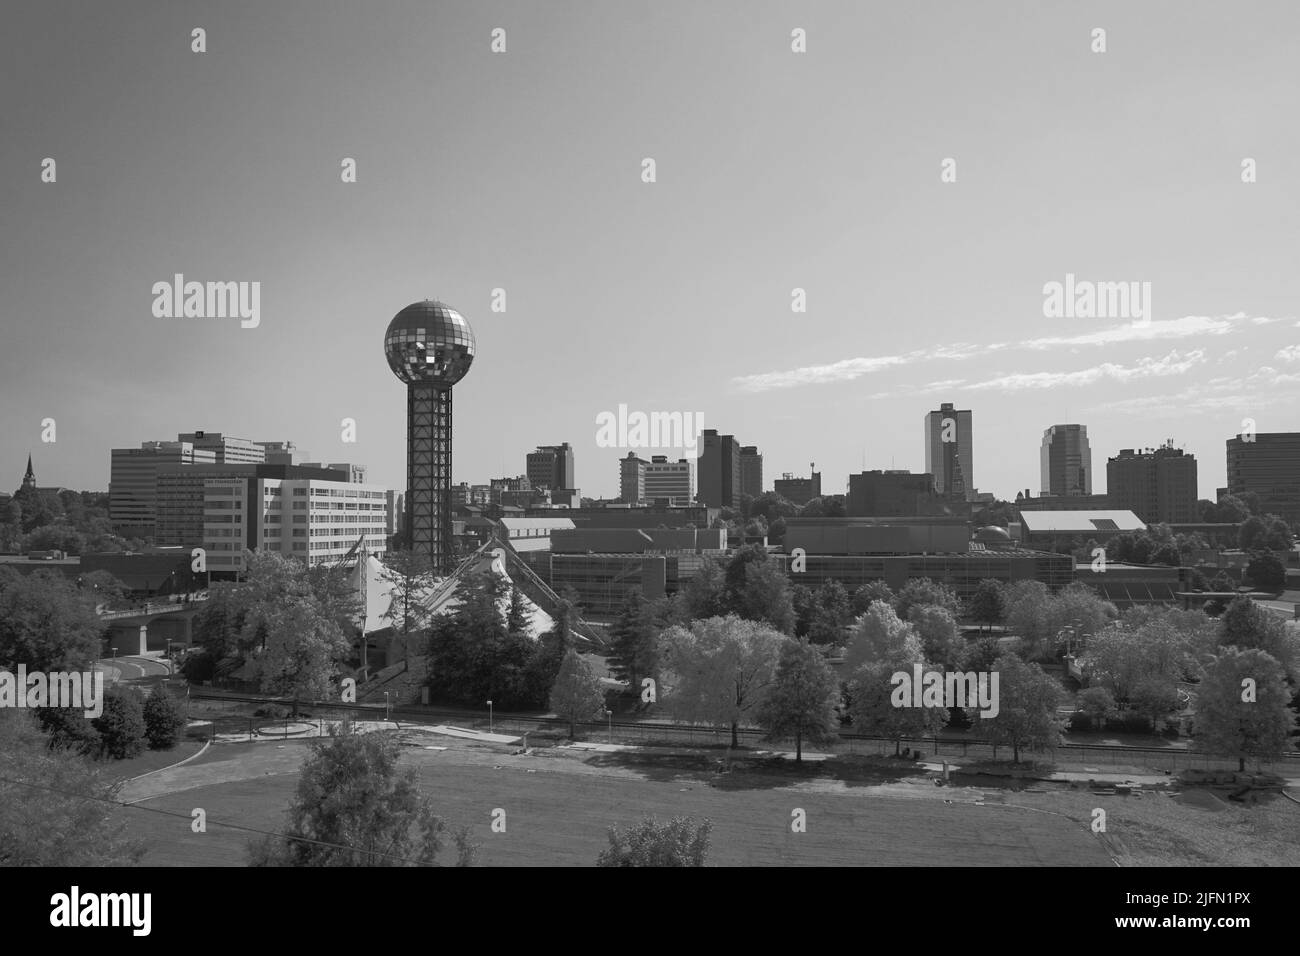 Knoxville Tennessee Downtown Skyline with Worlds Fair Park in Black and White Stock Photo